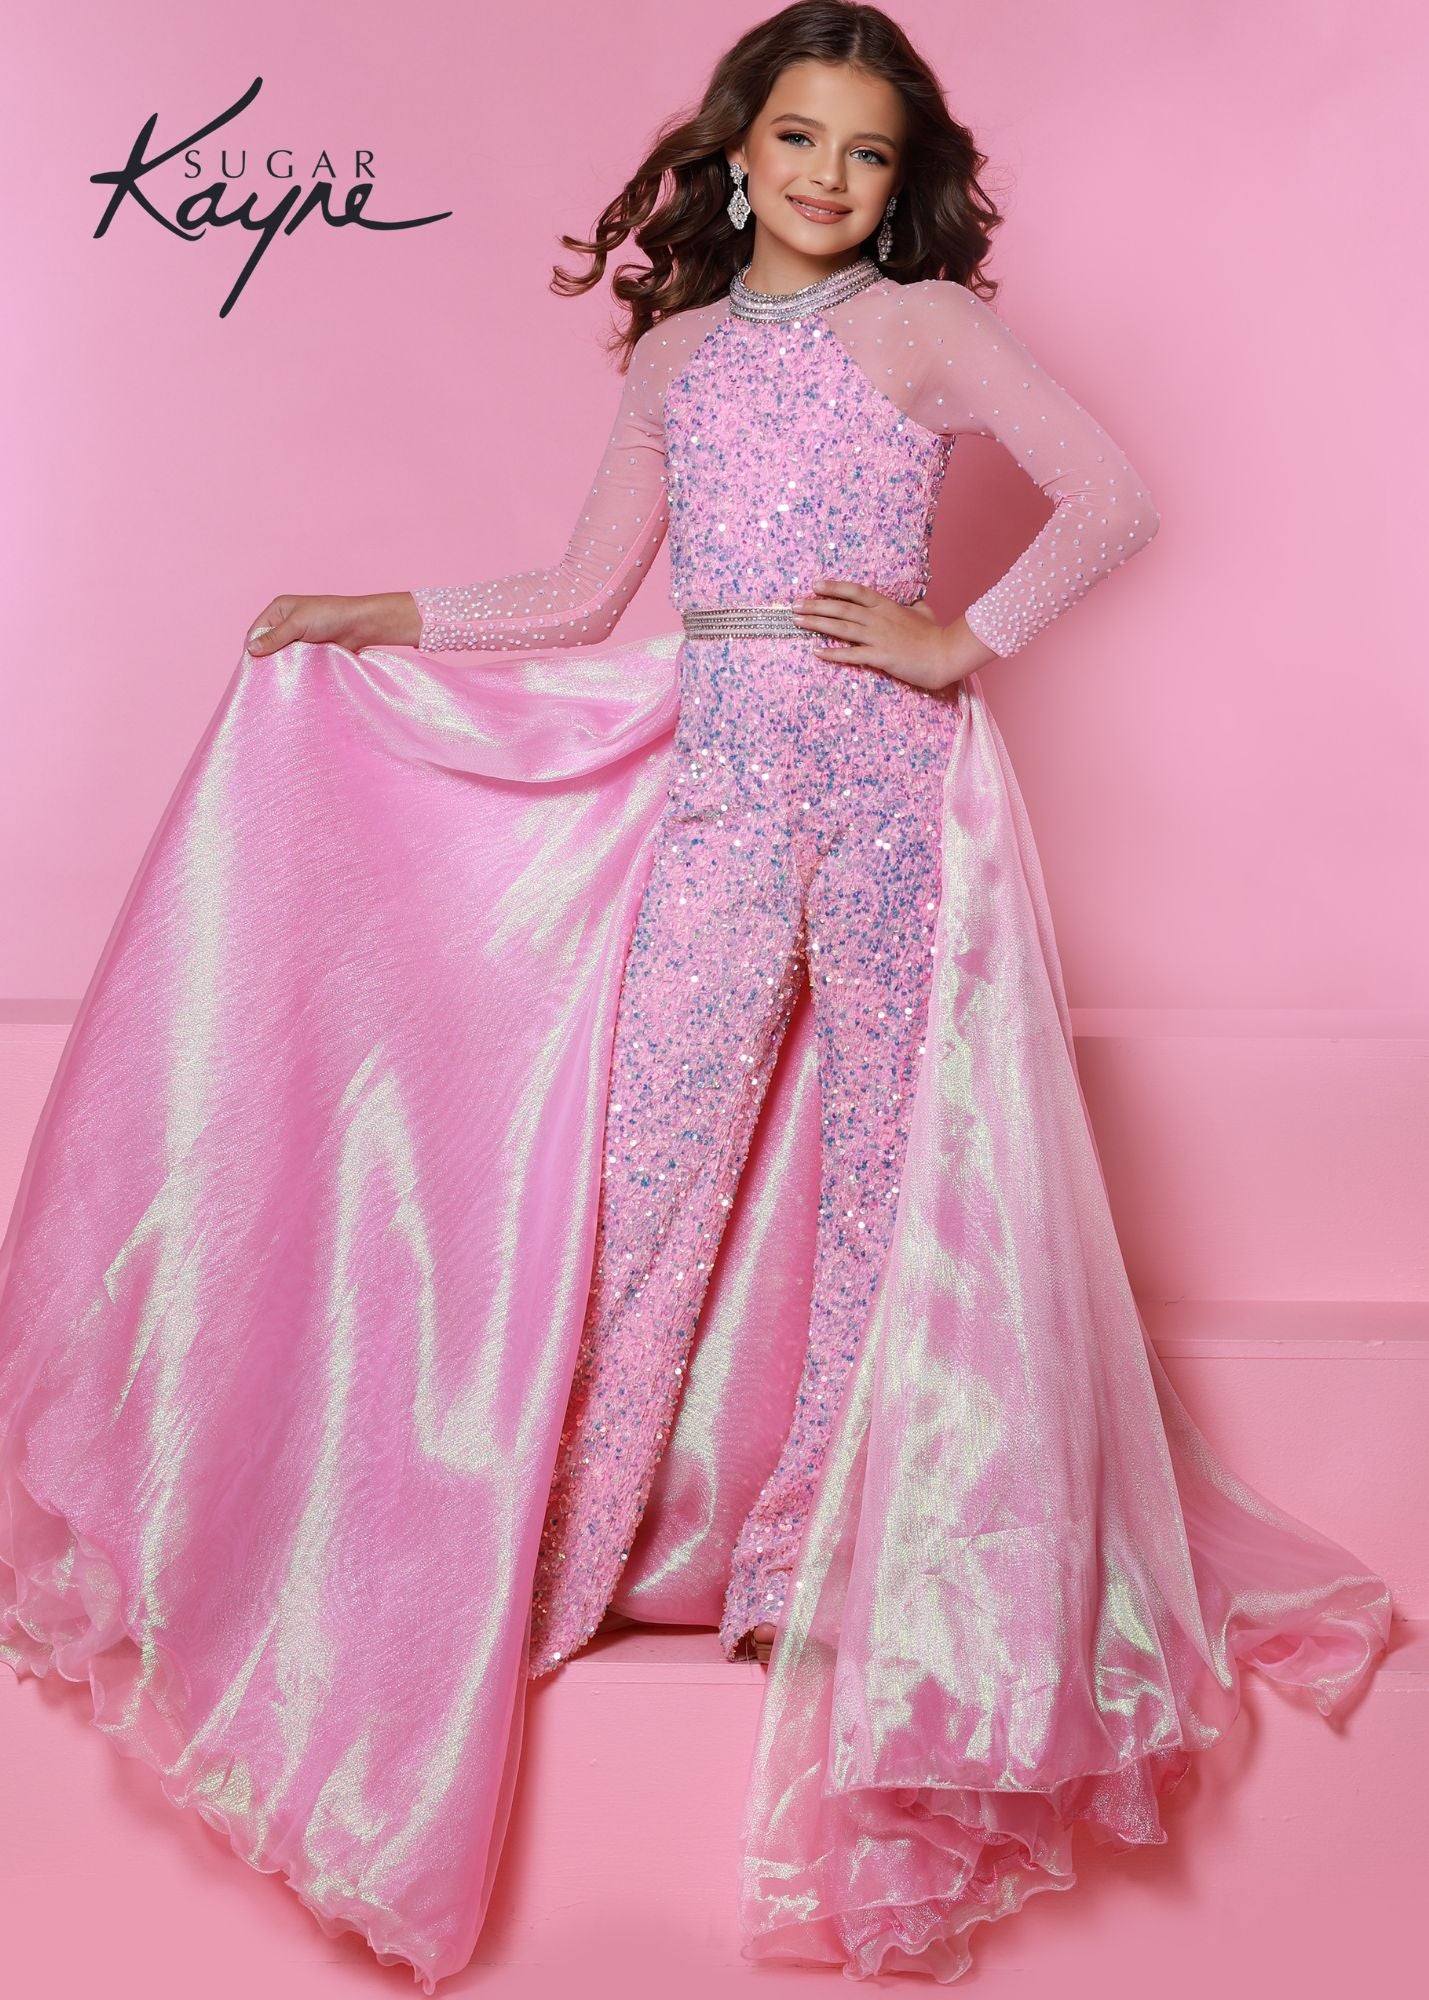 Sugar Kayne C104 by Johnathan Kayne is a Fun & Convertible Pageant Style. This is a Comfortable Stretch Velvet - Sequin Embellished Long Formal Jumpsuit. Featuring a high Crystal Embellished neckline and sheer long sleeves embellished with rhinestones. Detachable Metallic Shimmer Organza Long Overskirt Has rows of Crystal Rhinestone matching the neckline. Fun Fashion cotton candy pink